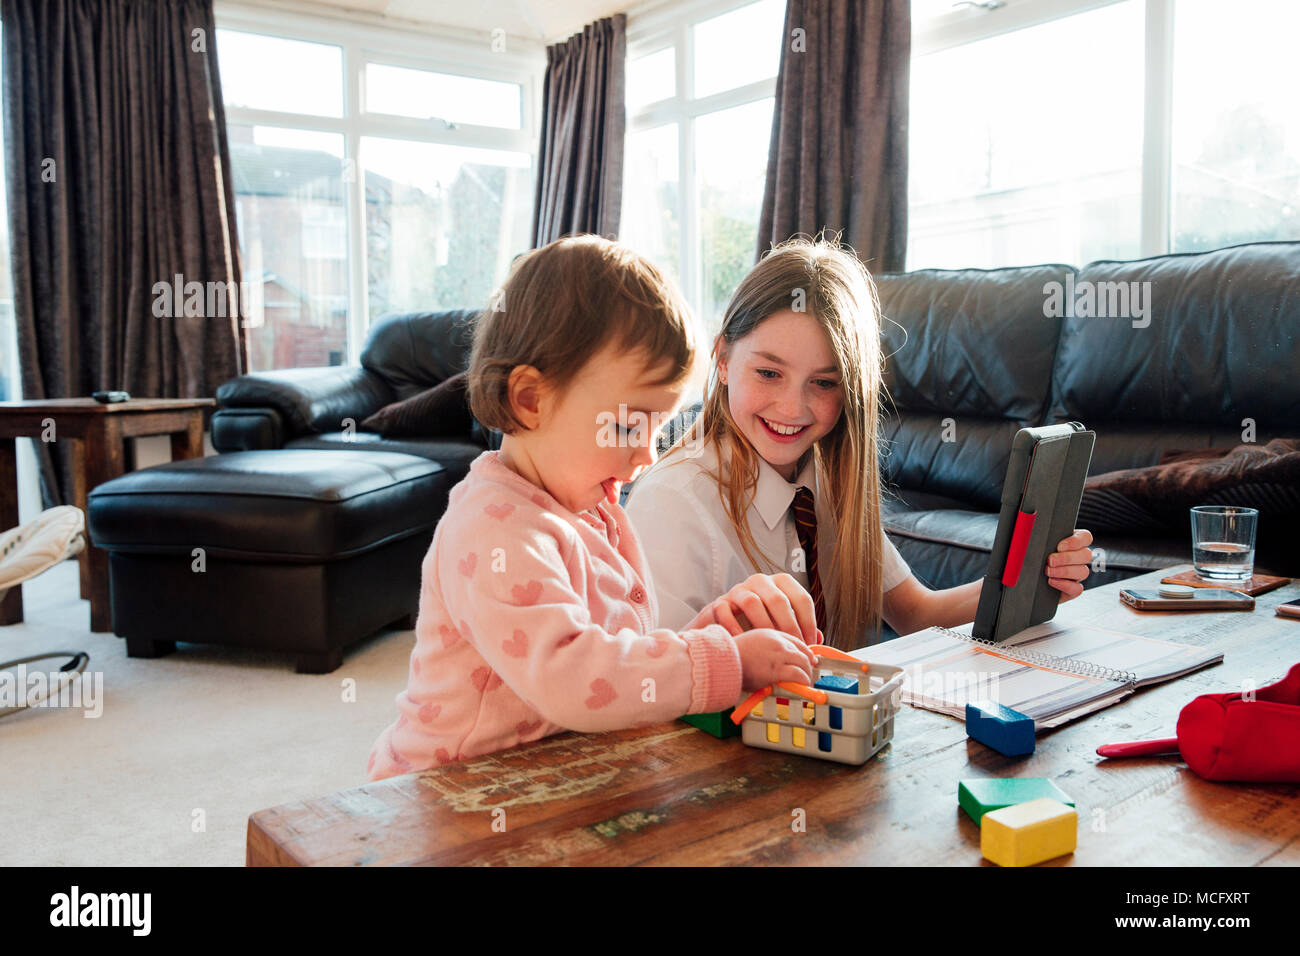 Little girl is distracting her older sister while she is trying to study at home. They are playing with toy blocks together. Stock Photo